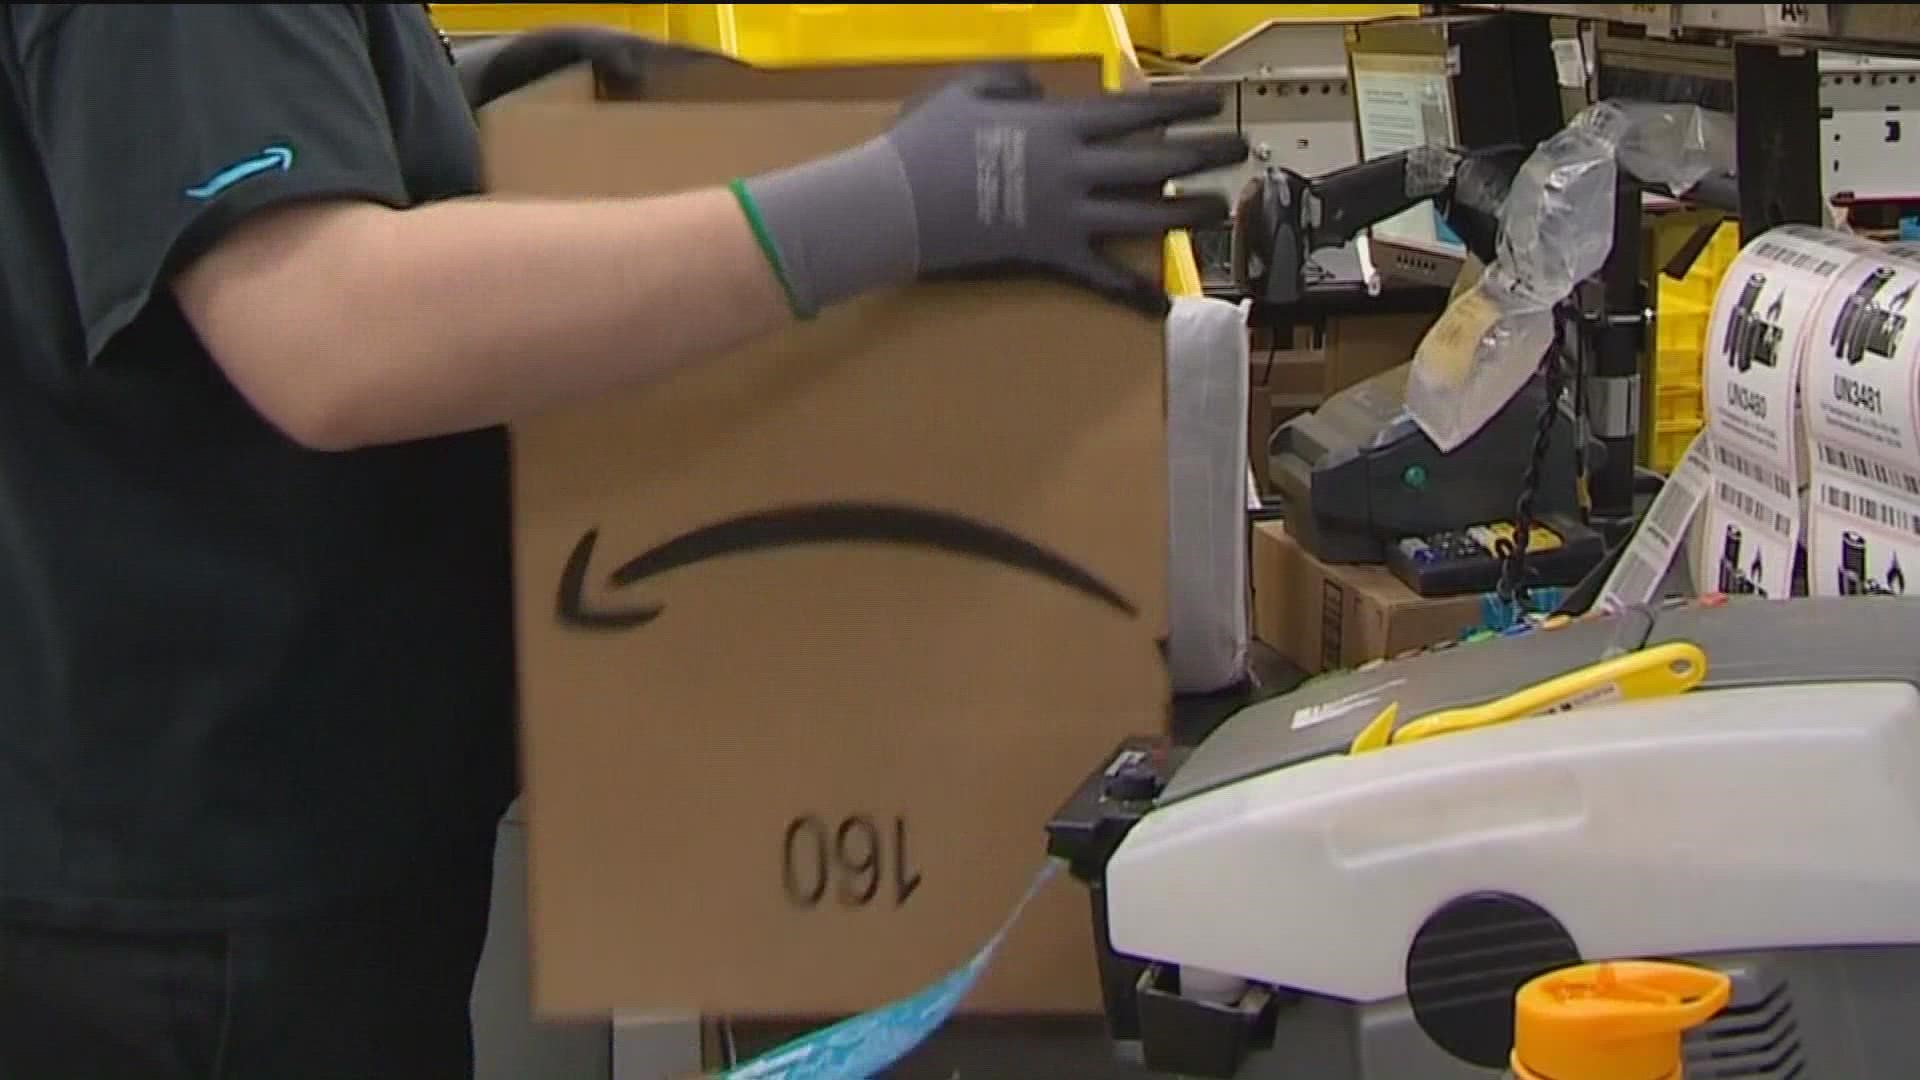 The proposed class action lawsuit says Amazon uses the guarantees to lure people in. The suit was filed in Federal Court by two San Diego residents.